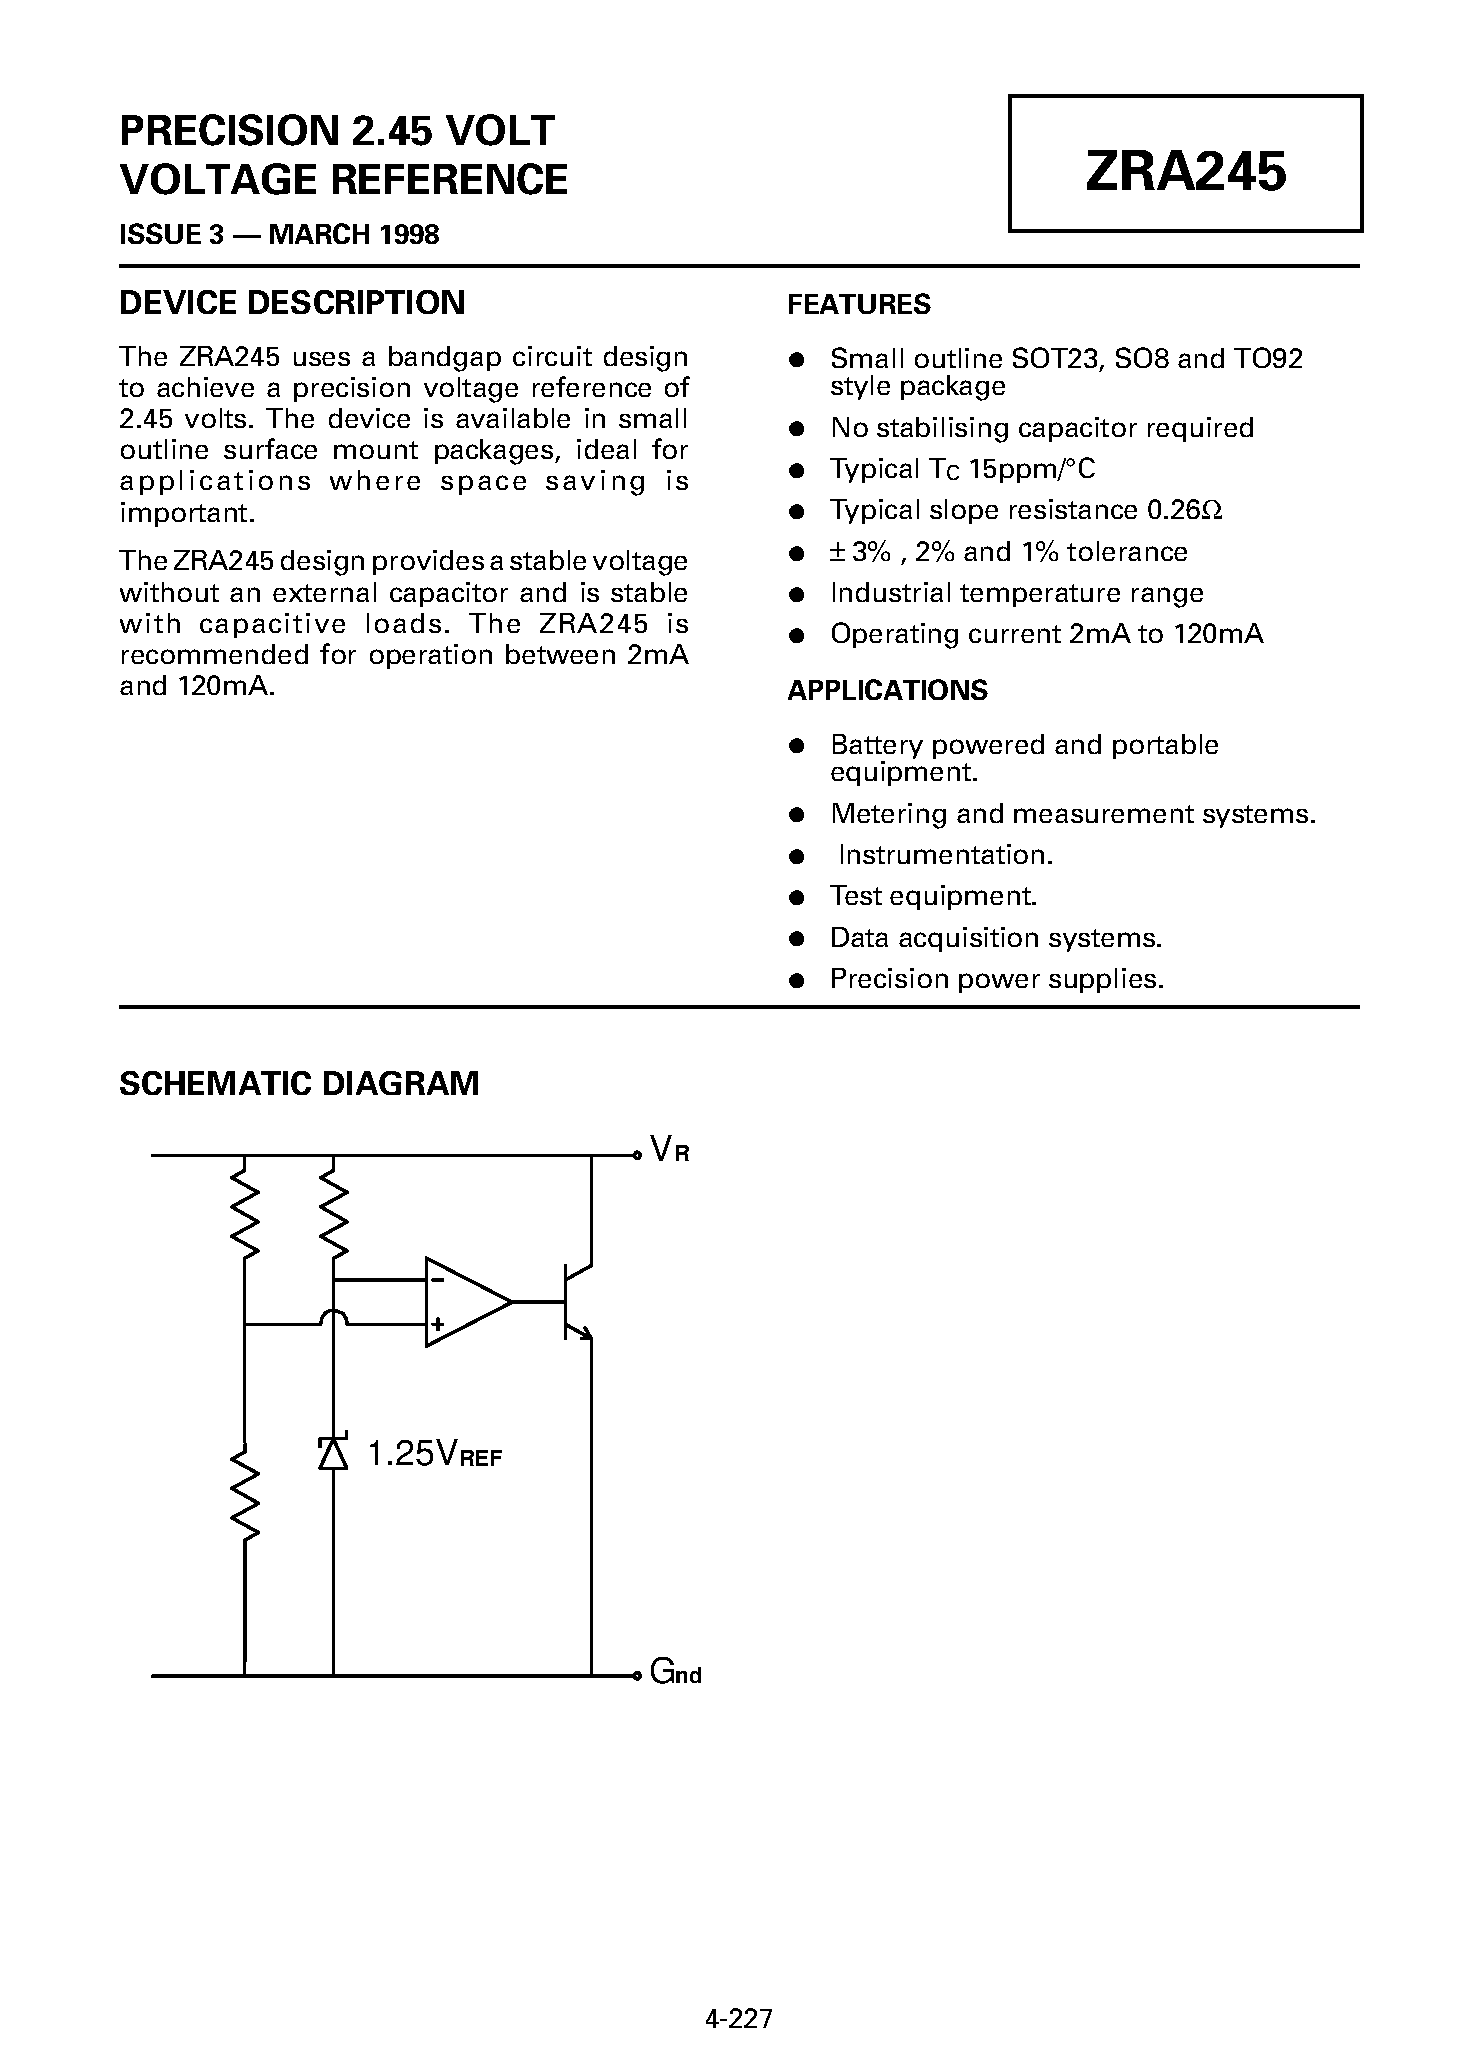 Datasheet ZRA245F02 - PRECISION 2.45 VOLT VOLTAGE REFERENCE page 1